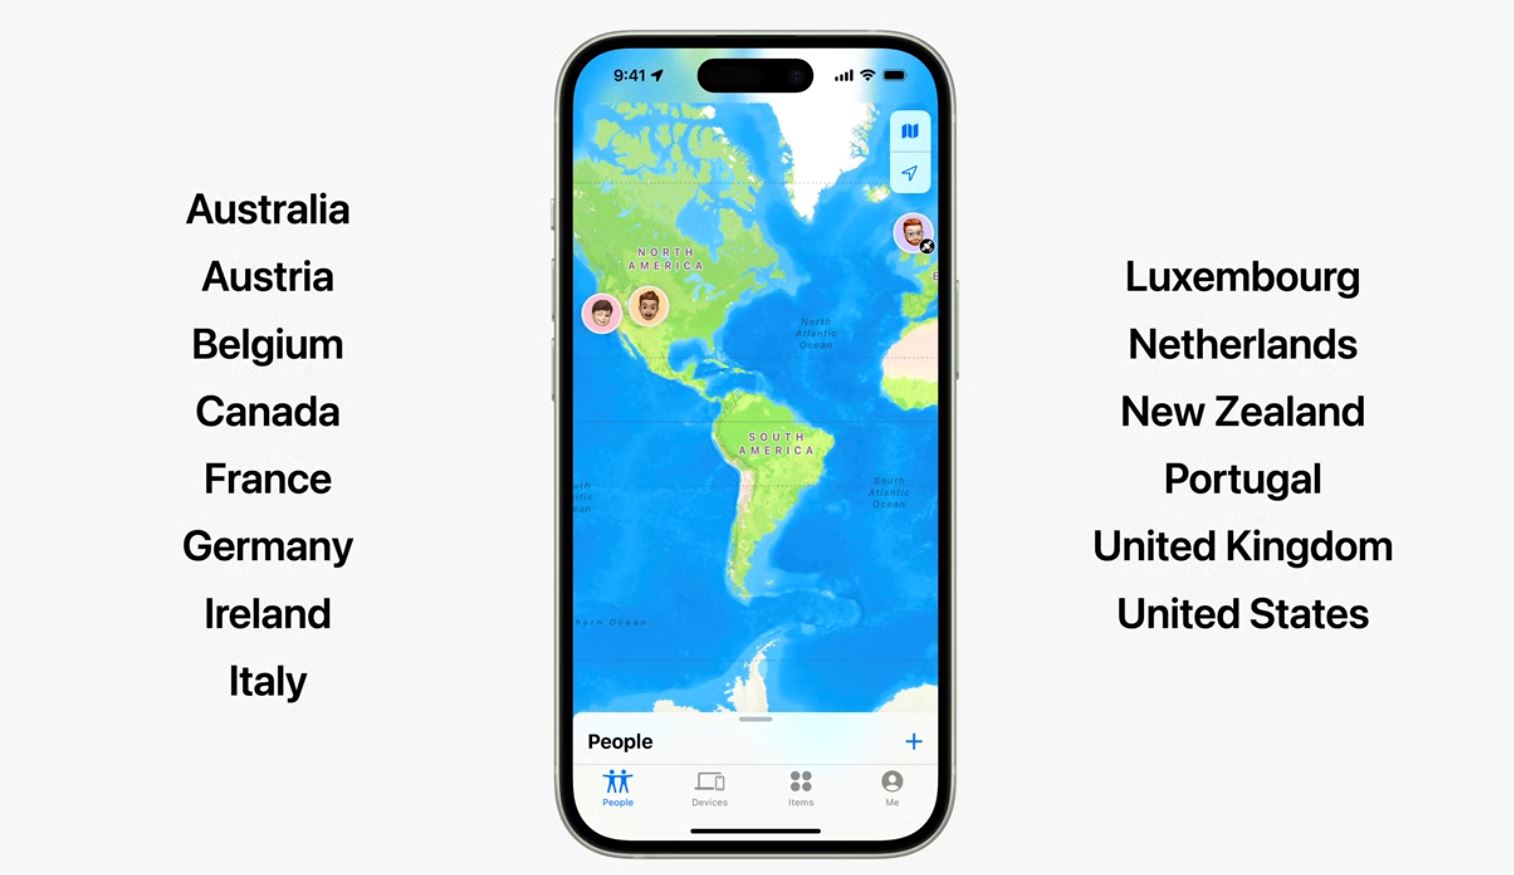 Apple is increasing the reach of its SOS feature when people are out of coverage